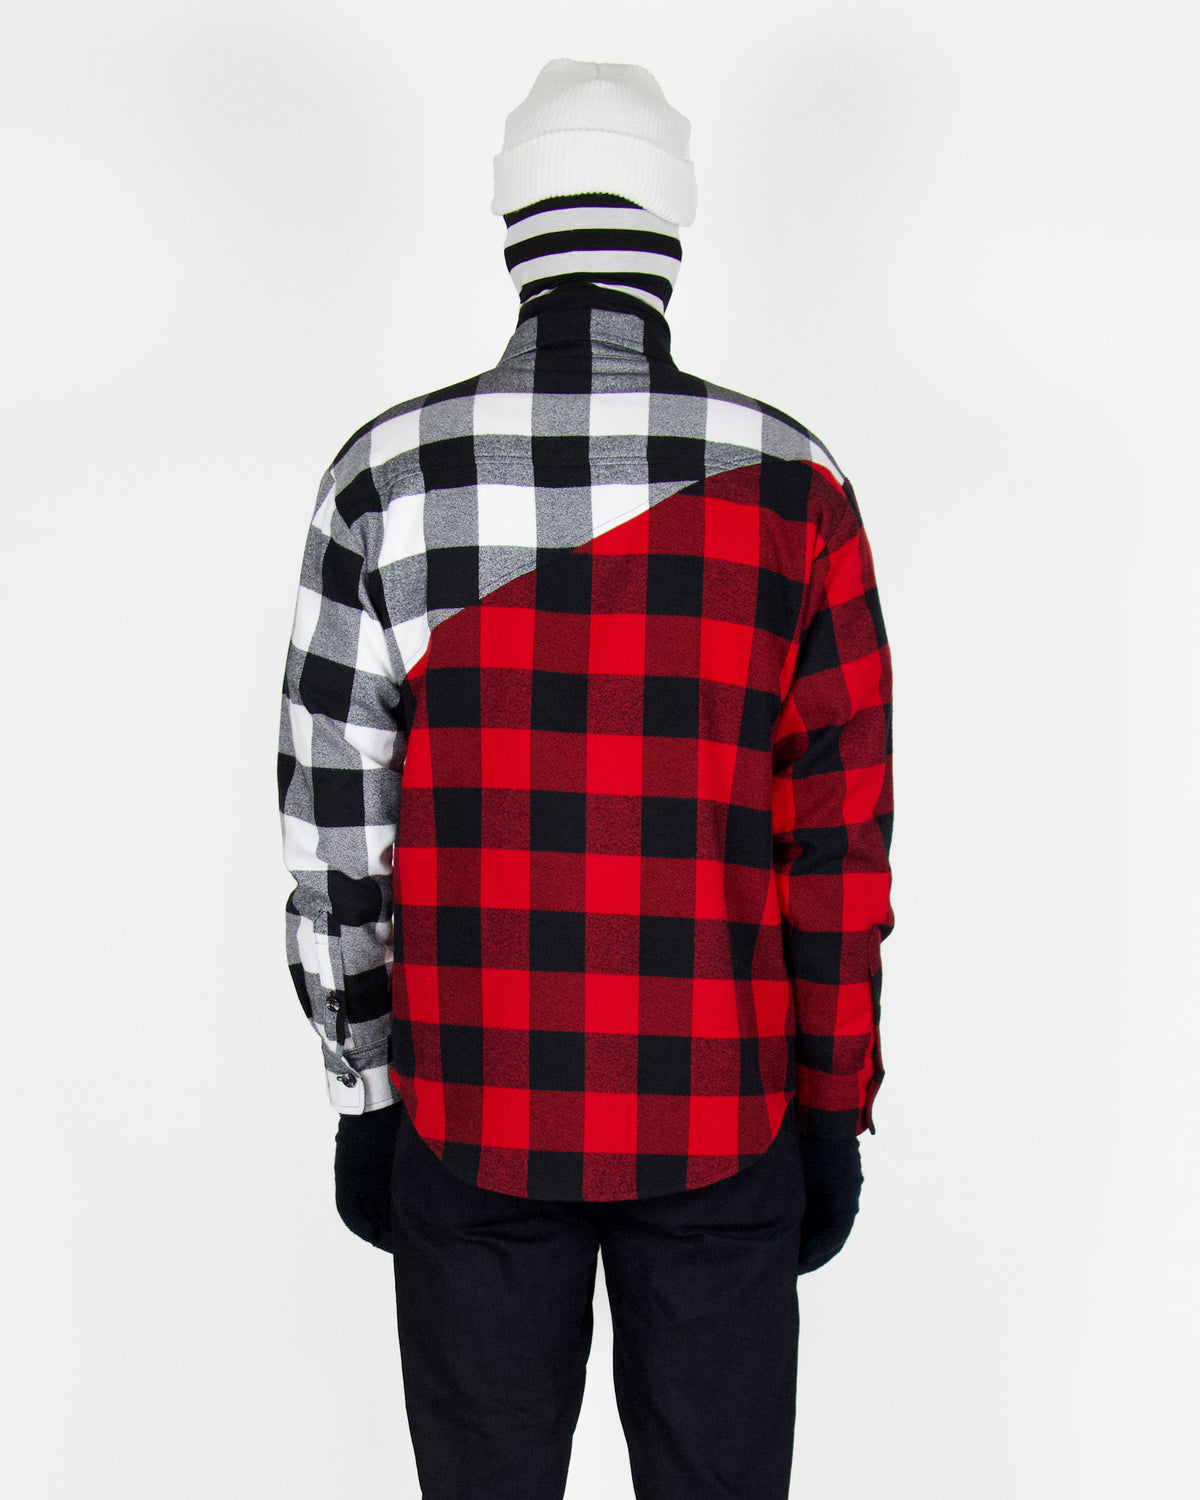 Carlos Button Up - White and Red Flannel